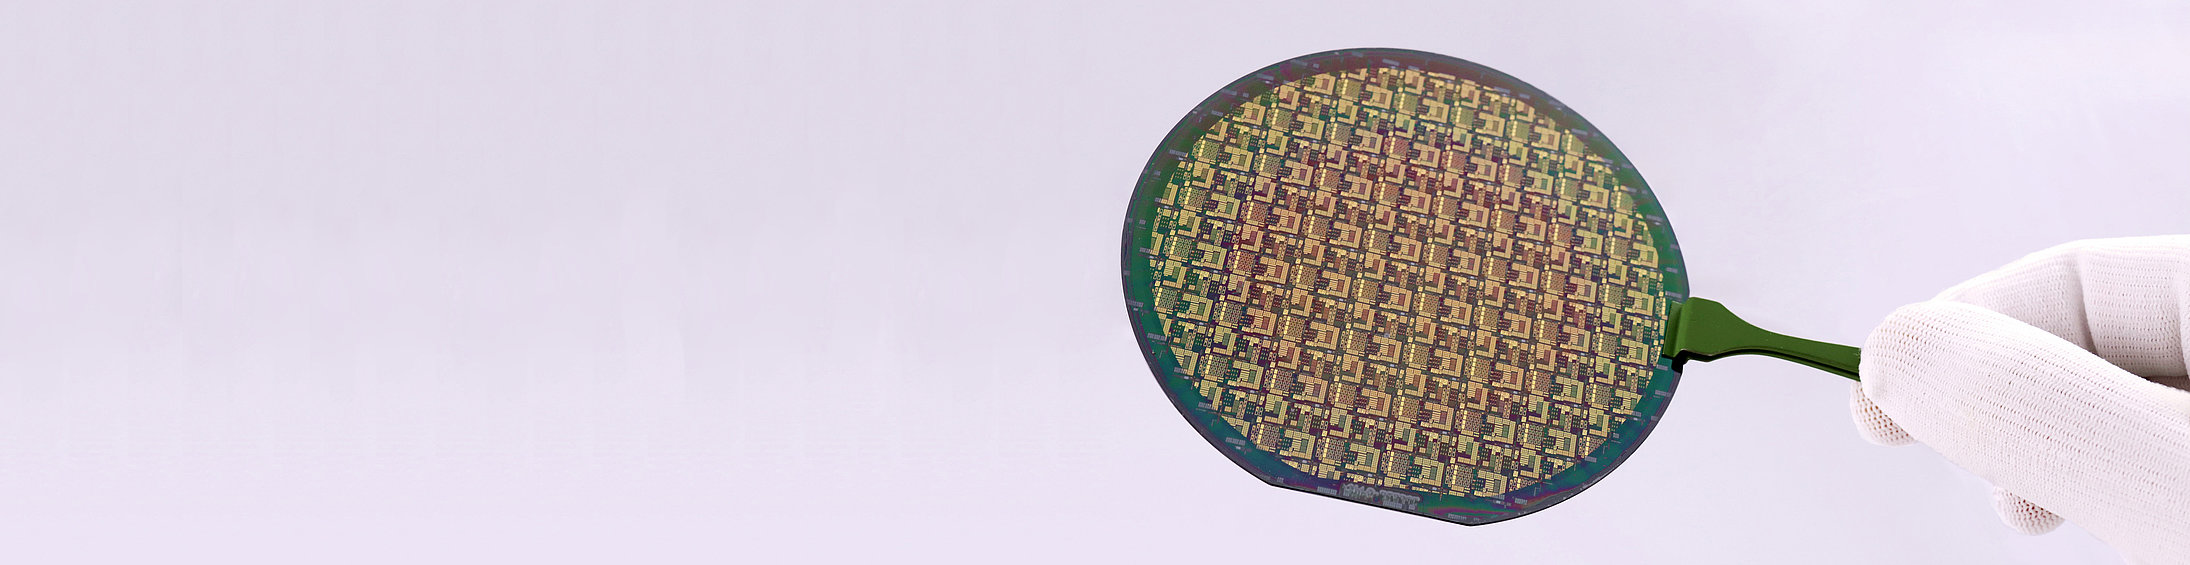 Photo of an InP-MMIC-Wafer